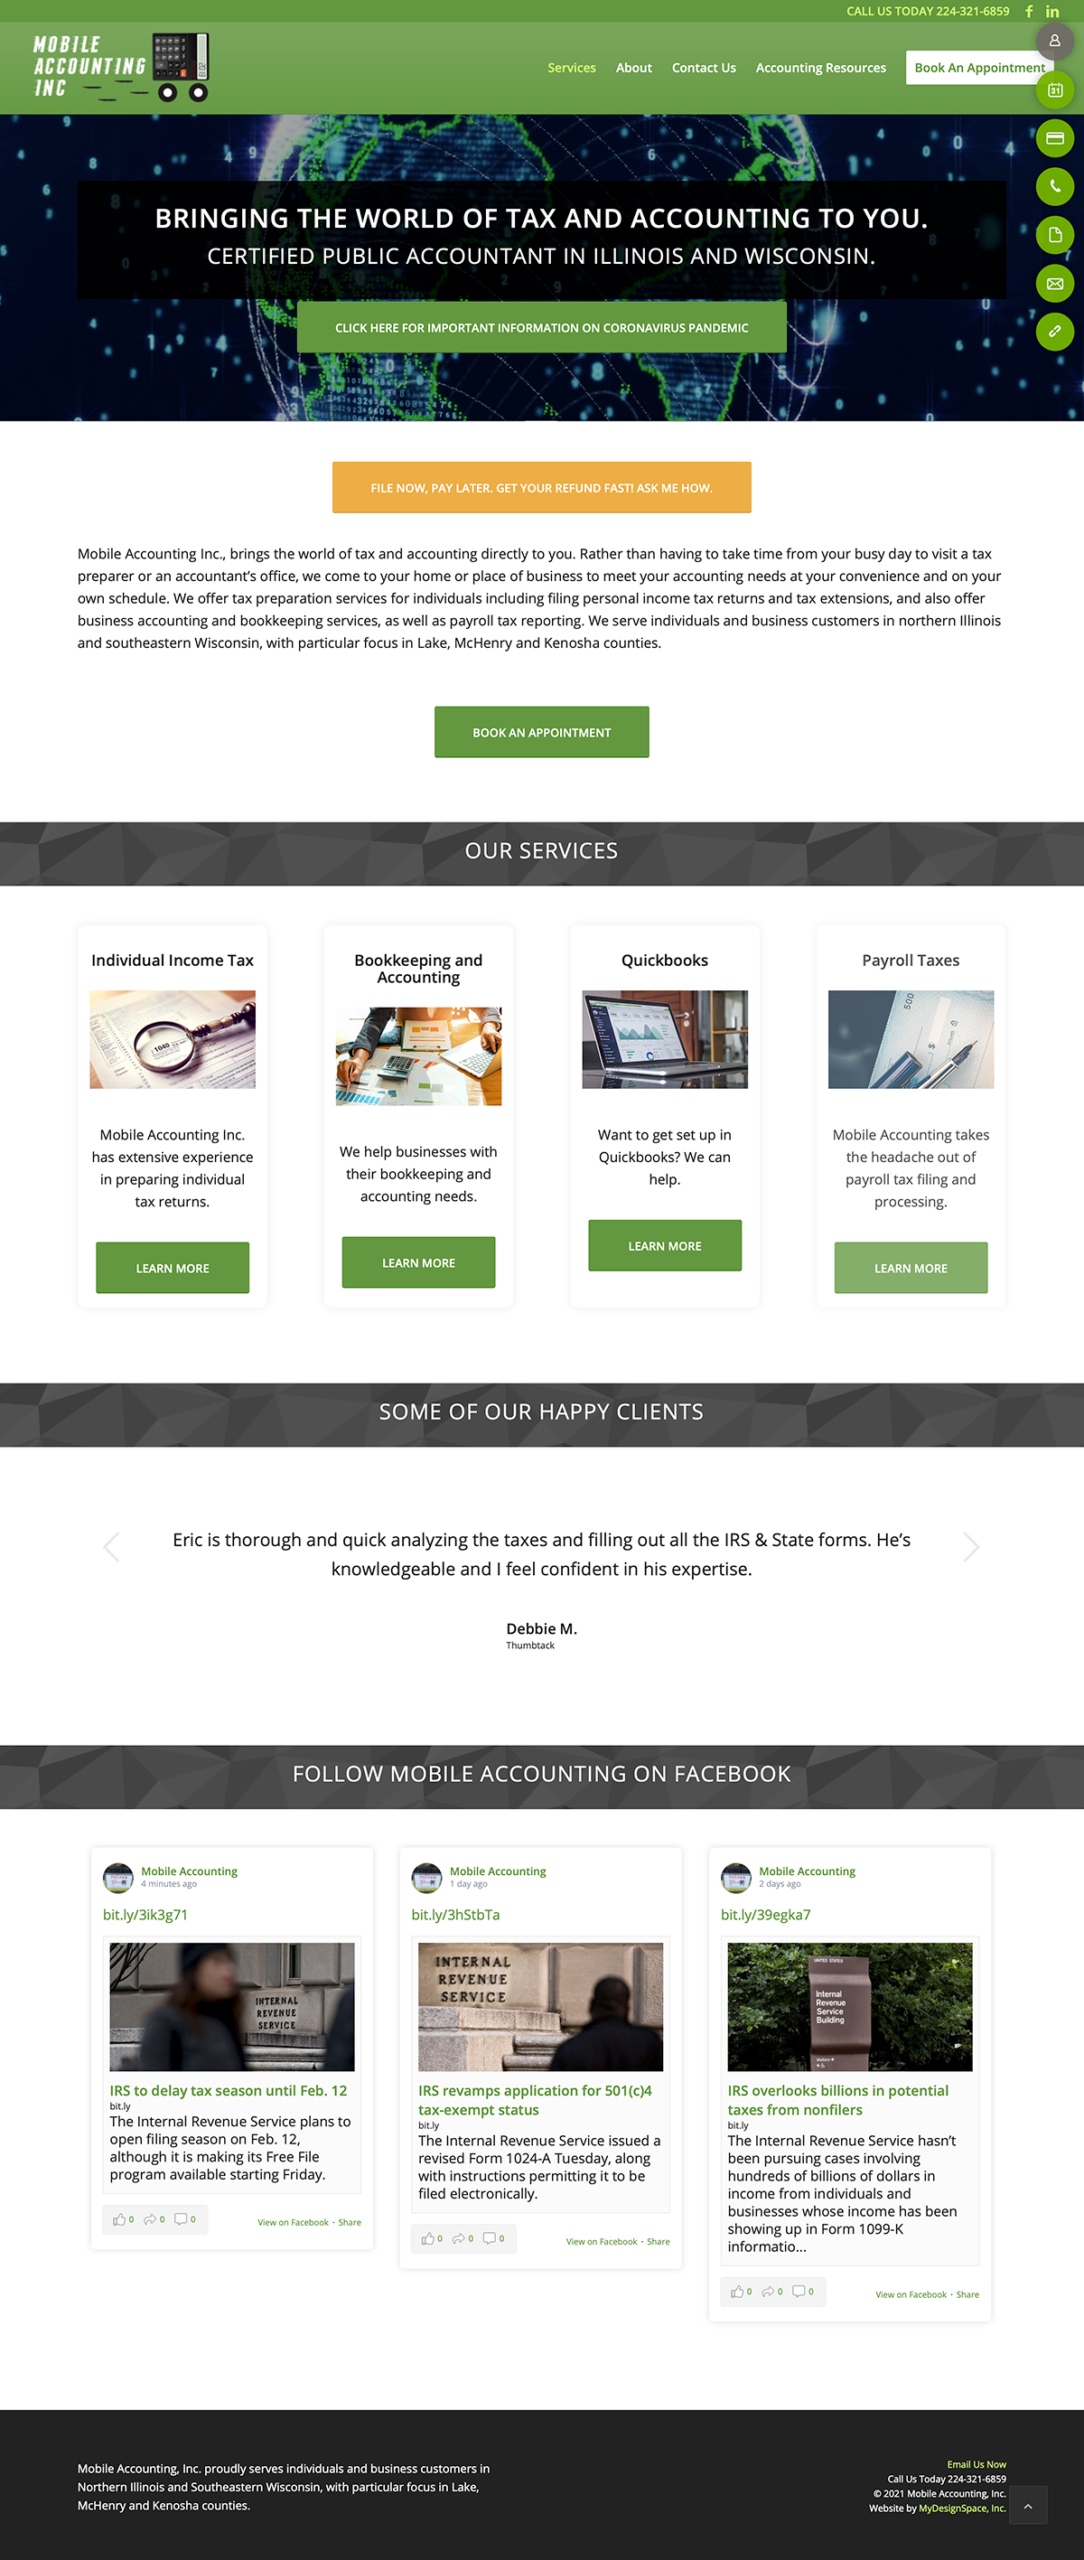 Mobile Accounting Home Page Layout